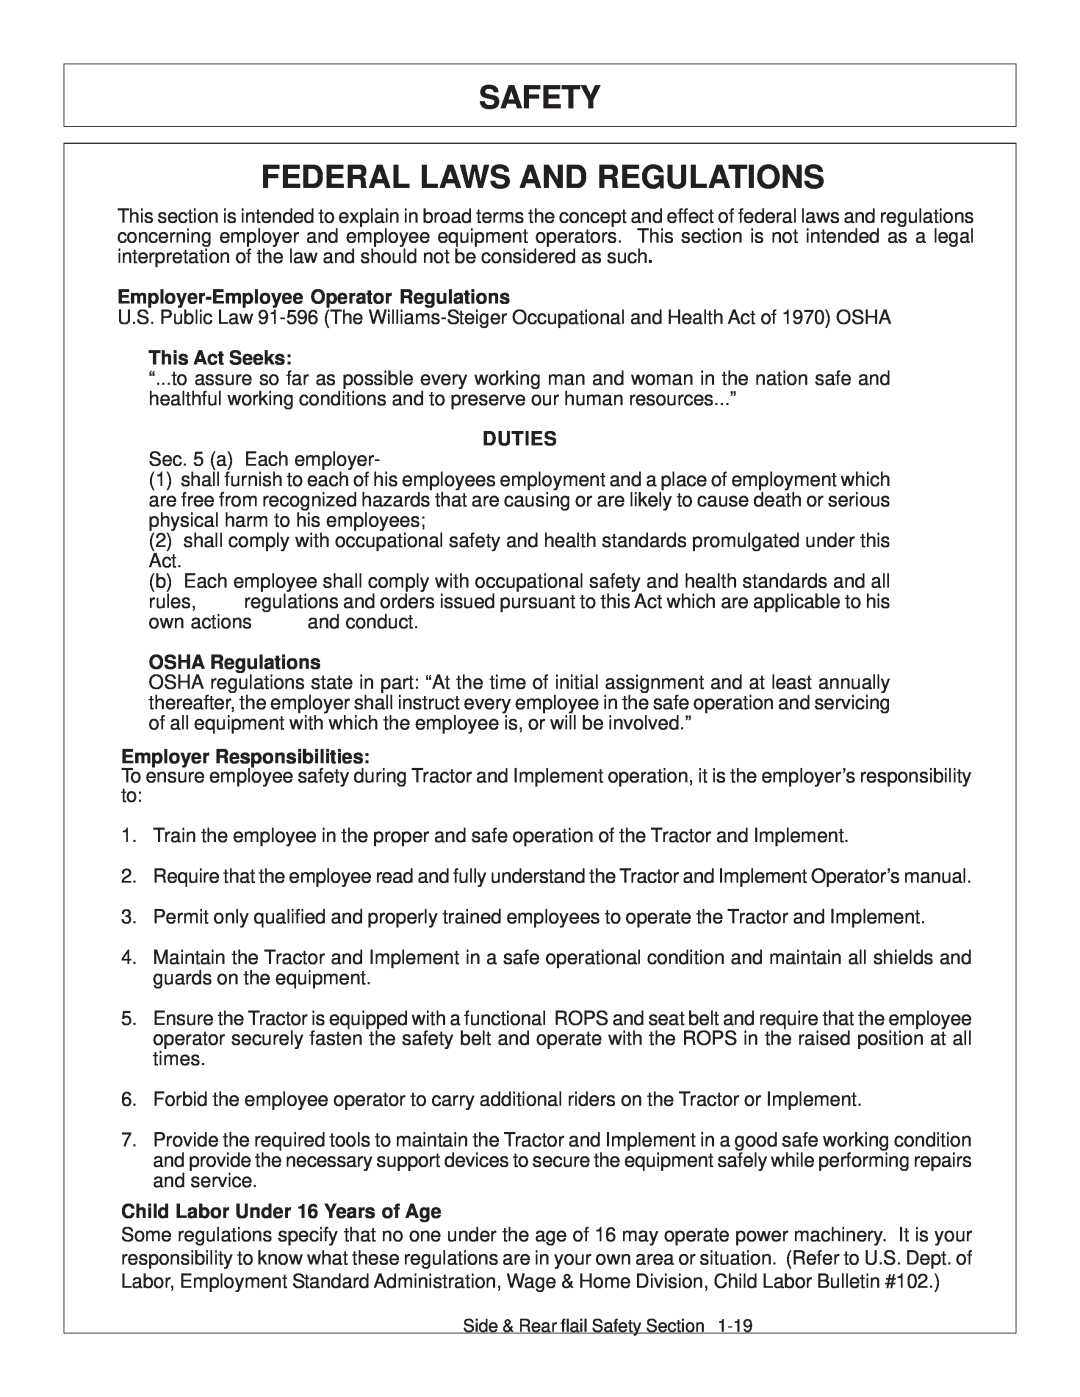 Tiger JD 5093E manual Safety Federal Laws And Regulations, Employer-Employee Operator Regulations, This Act Seeks, Duties 